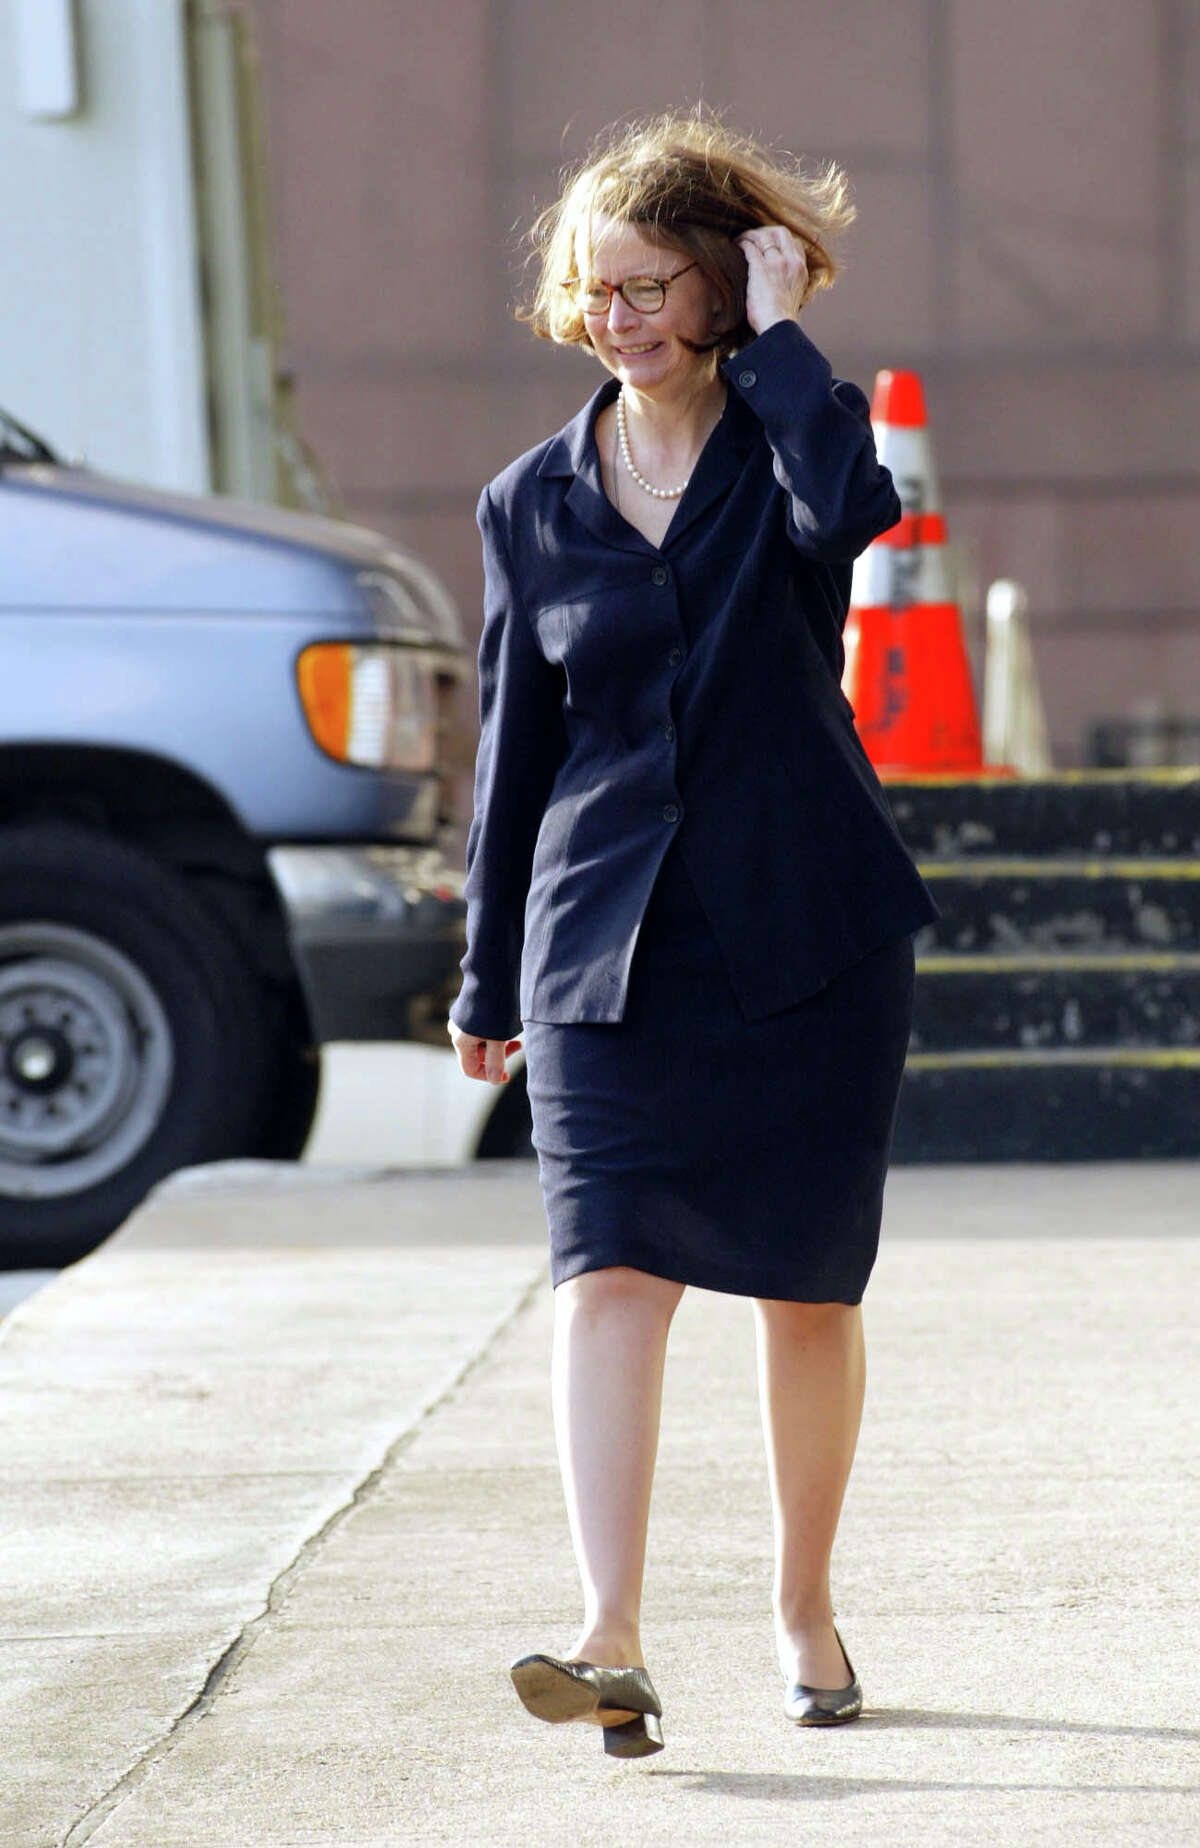 US District Judge Melinda Harmon arrives at the federal courthouse in Houston, Texas, for the beginning of the third week in the Arthur Andersen trial on Monday, May 20, 2002. Photographer: Craig Hartley/Bloomberg News